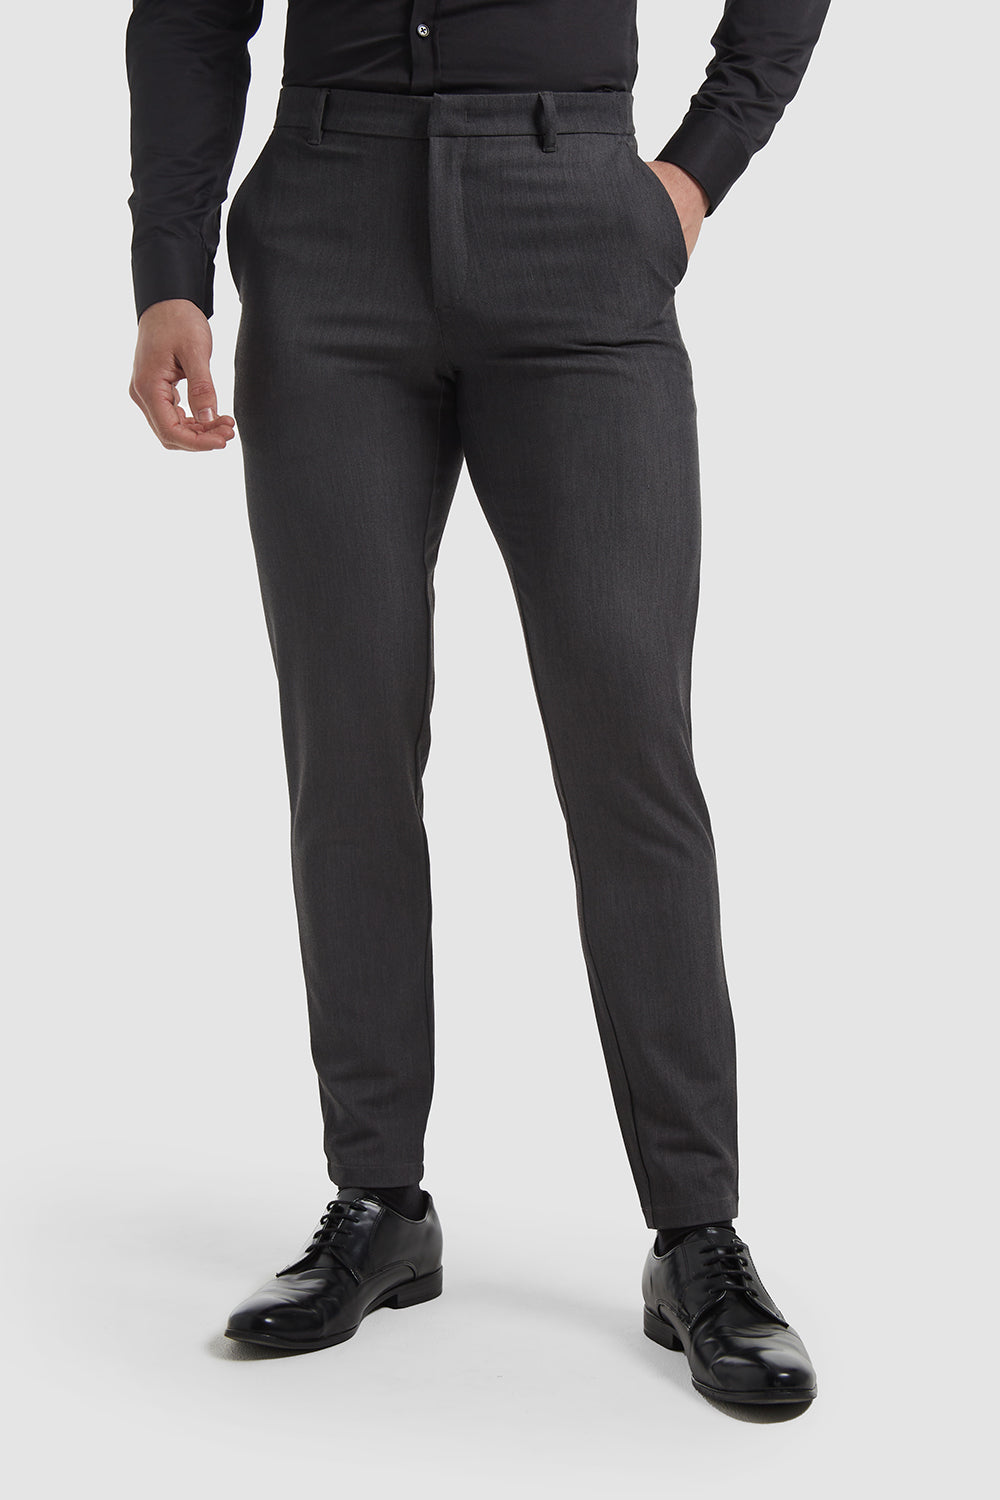 Athletic Fit Essential Pants 2.0 In Navy - TAILORED ATHLETE - USA